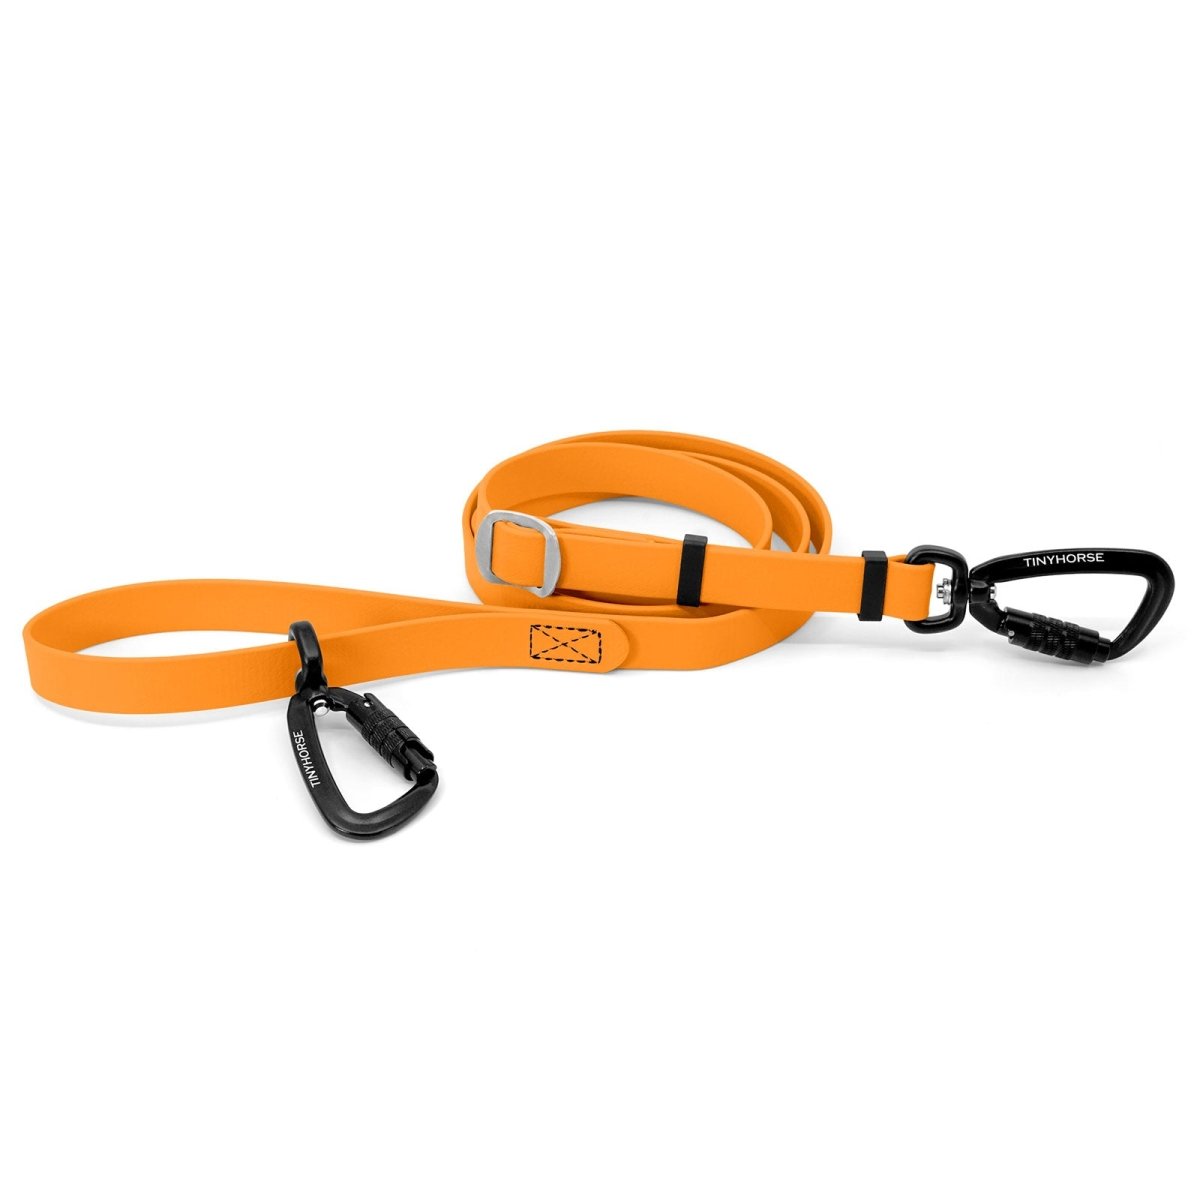 An adjustable pastel orange-coloured Lead-All Pro Extra made of BioThane with 2 auto-locking carabiners